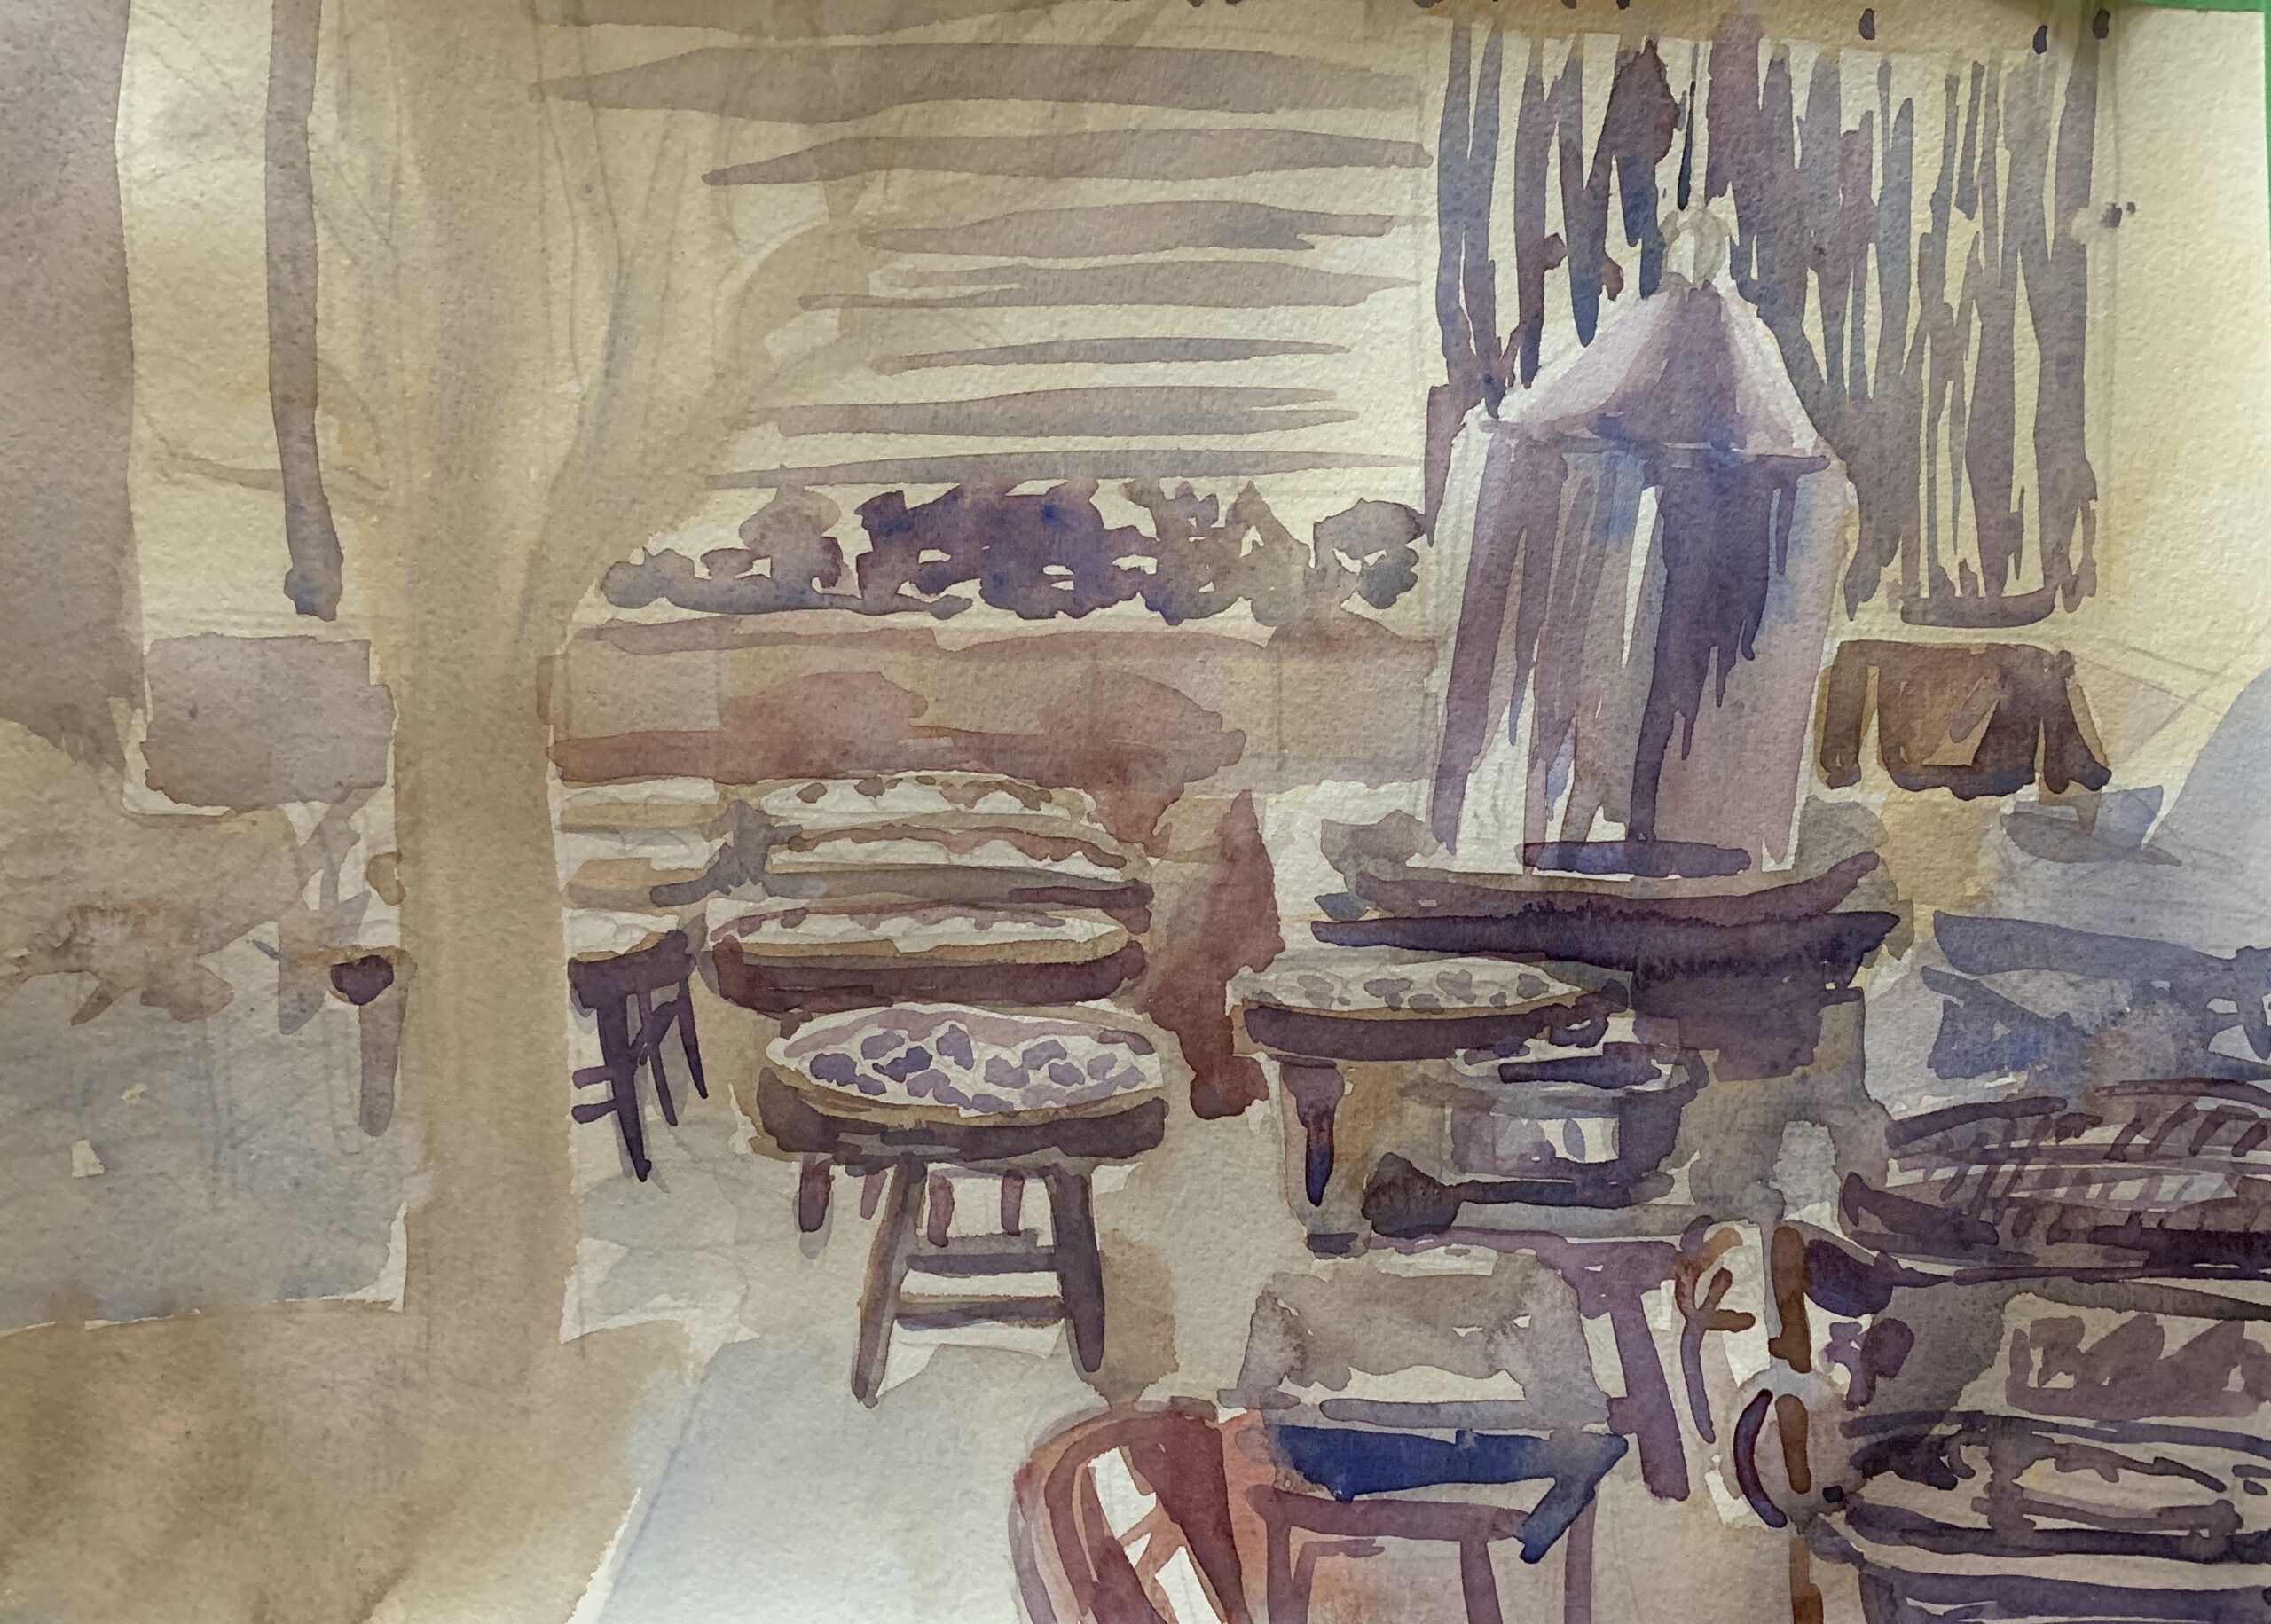 10 Key Takeaways from a Perspective Drawing Class